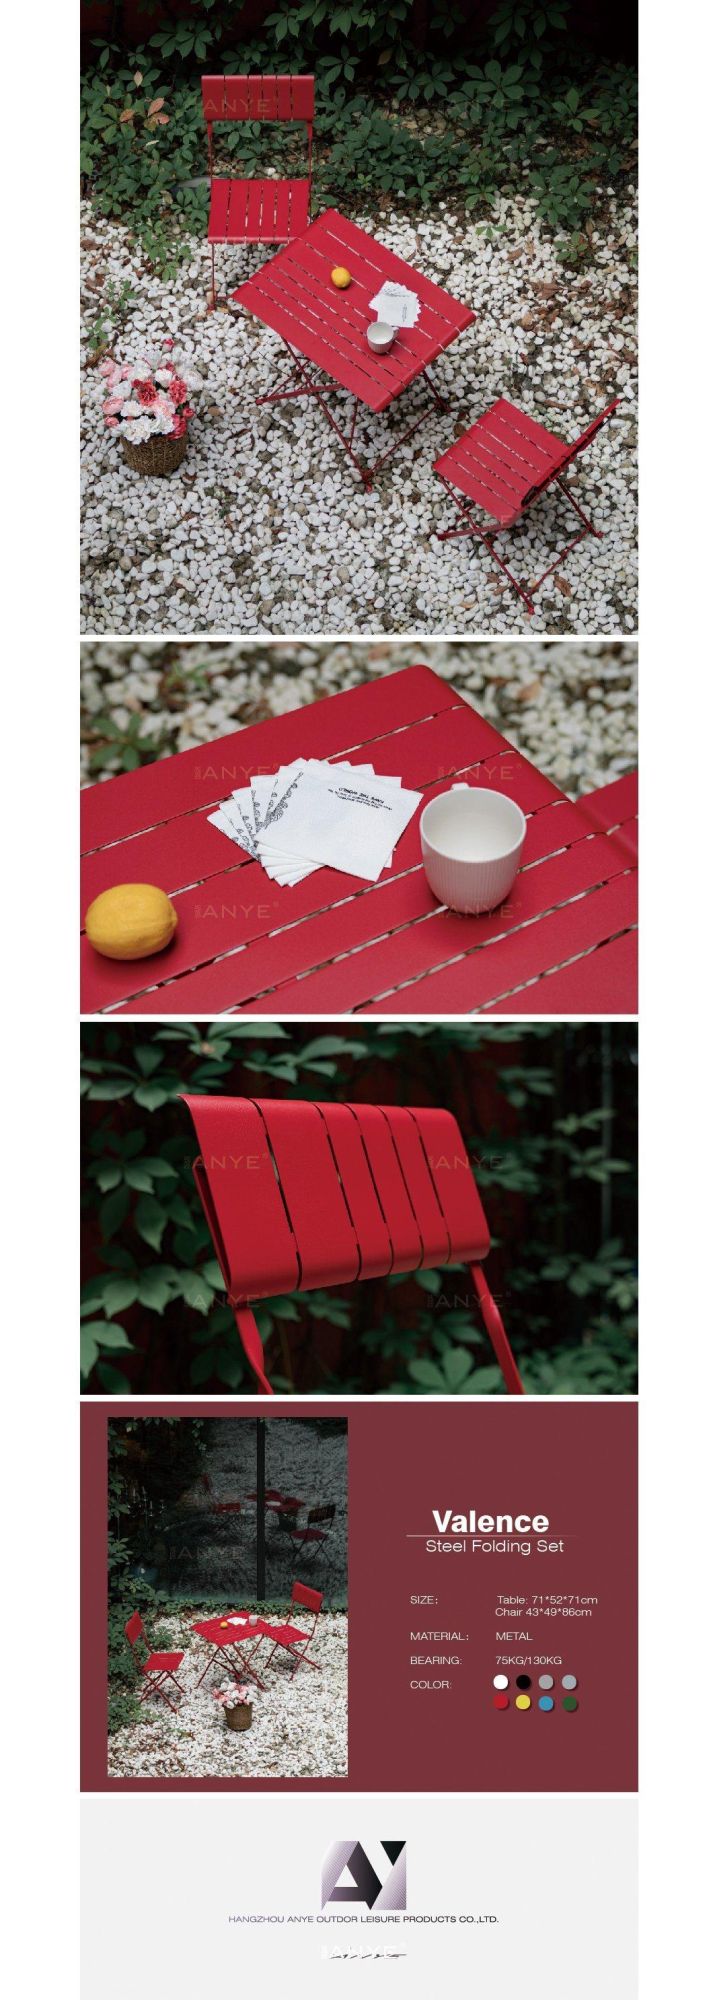 Durable Steel Slats Design Backyard Furniture Foldable Square Table and Side Chair Bistro Set